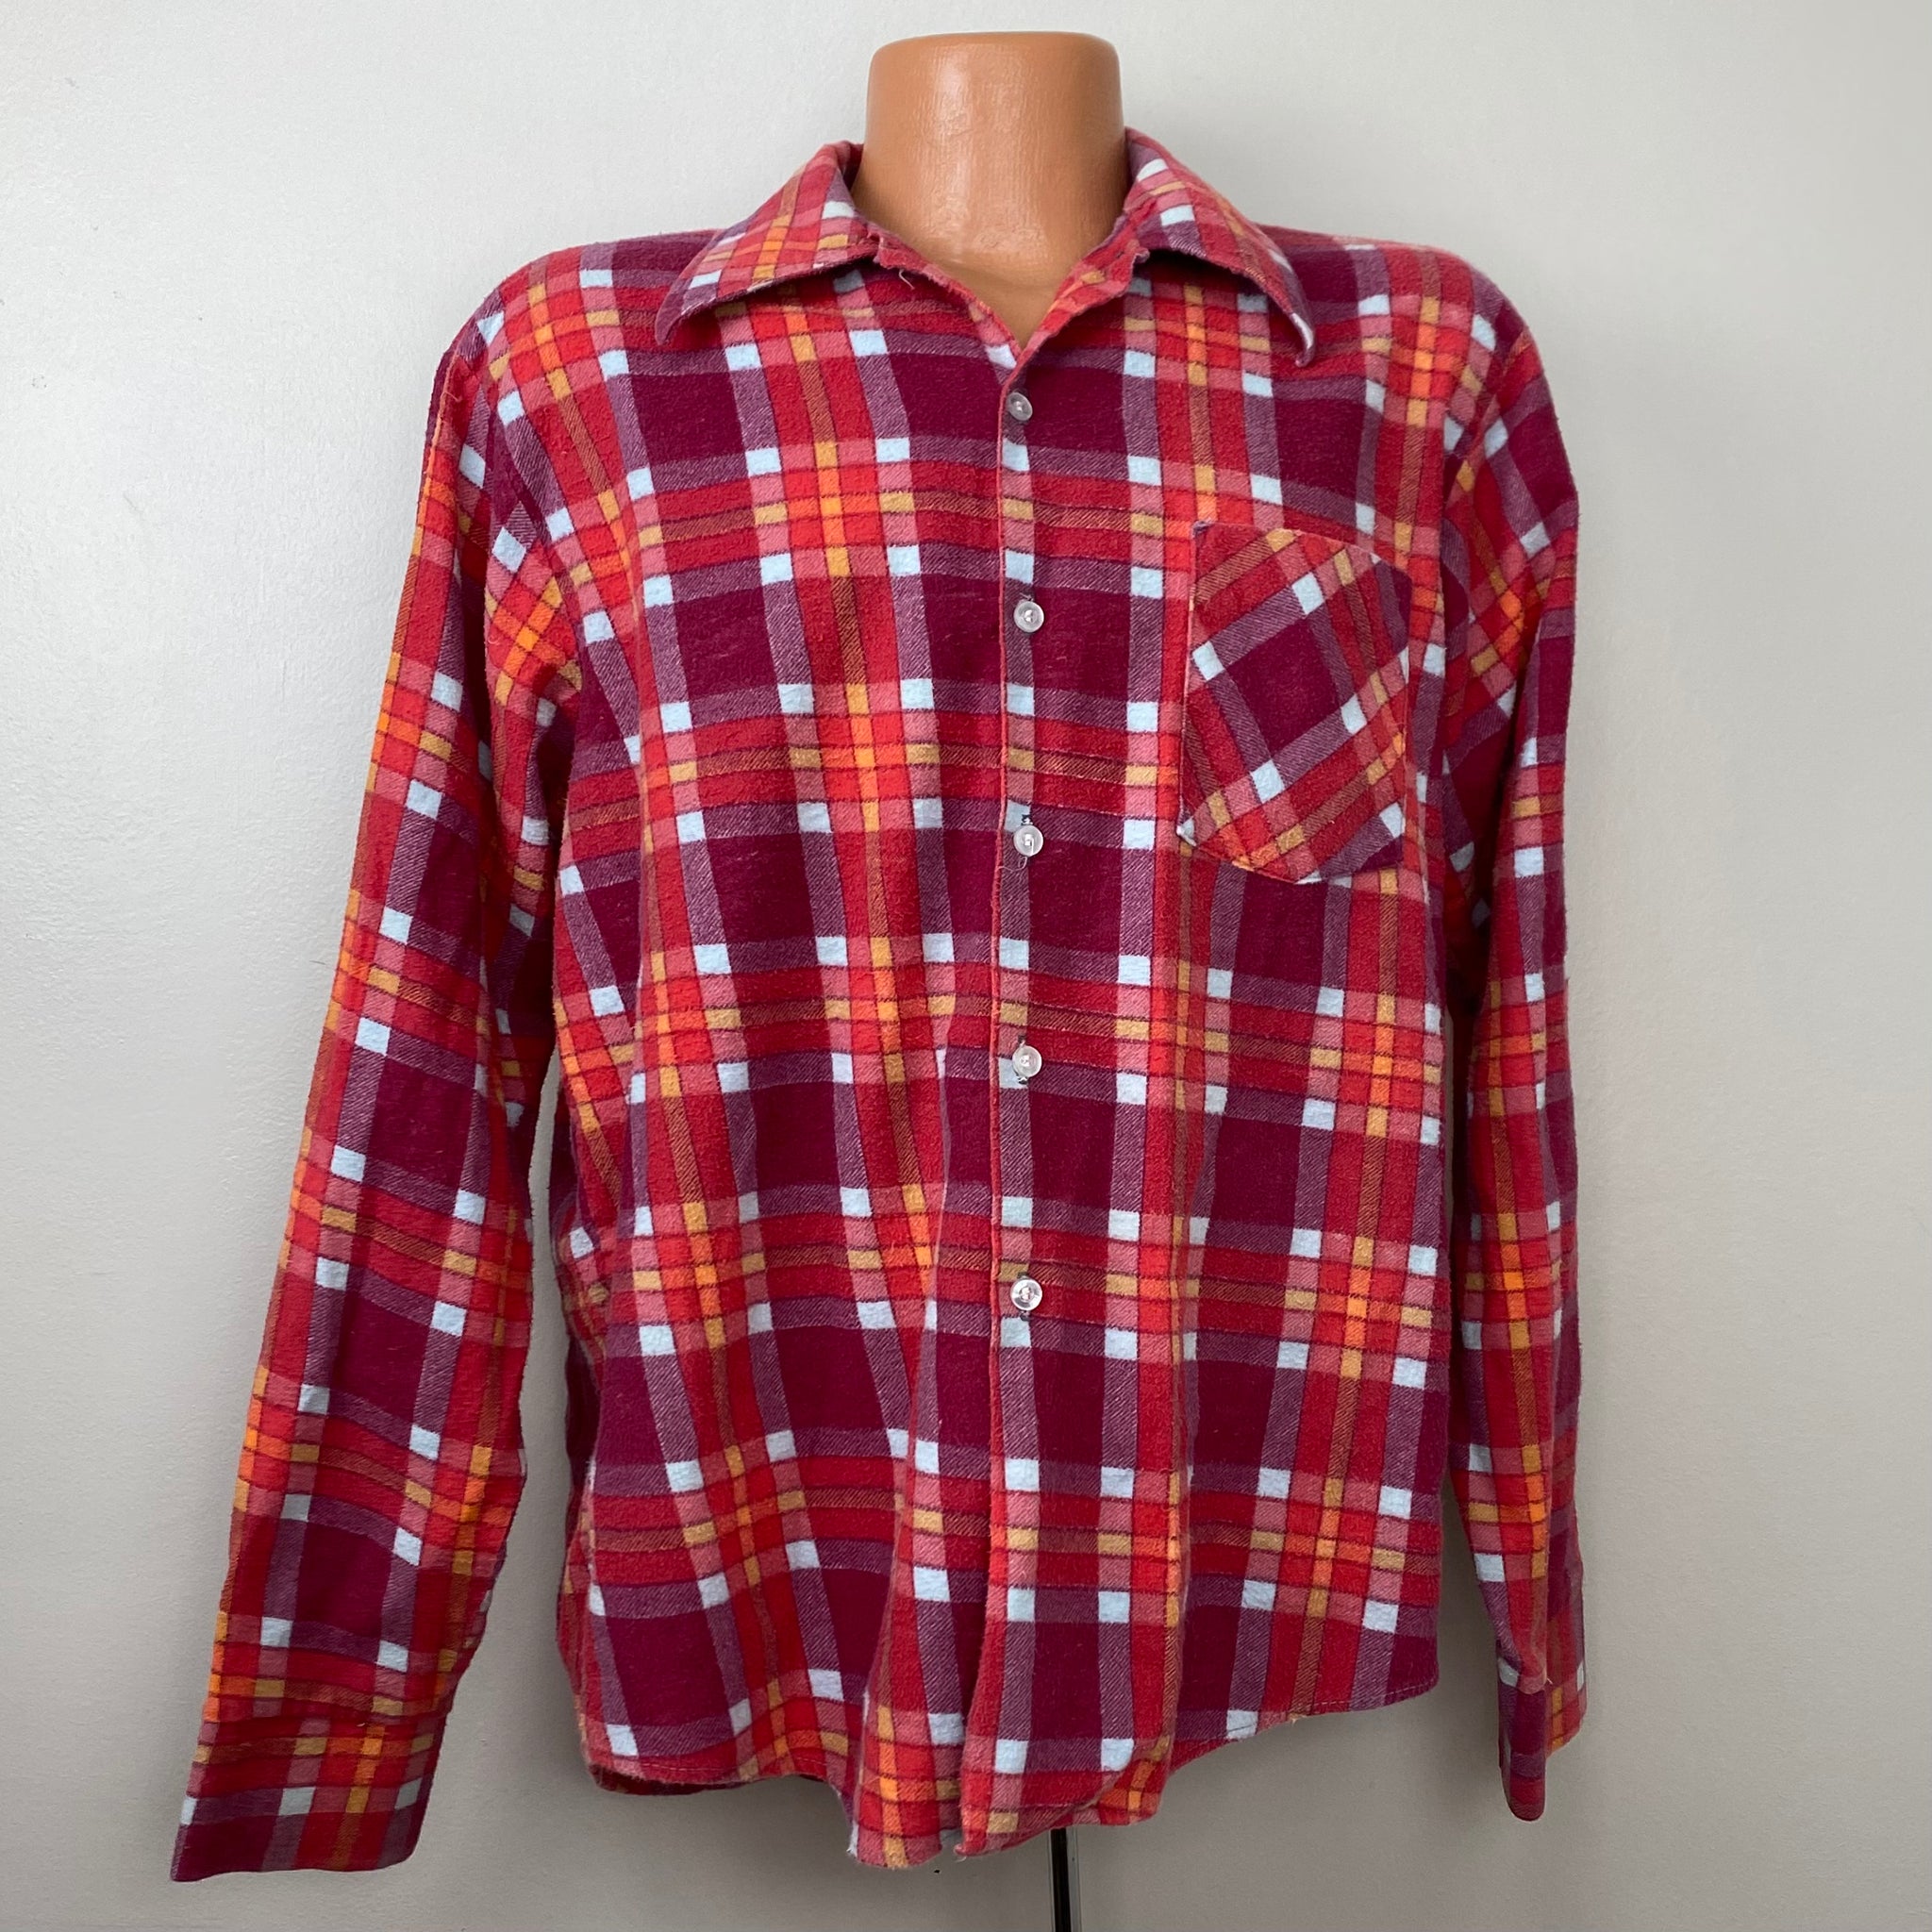 1970s Red Plaid Flannel Shirt, Size Large, Printed Distressed – Proveaux